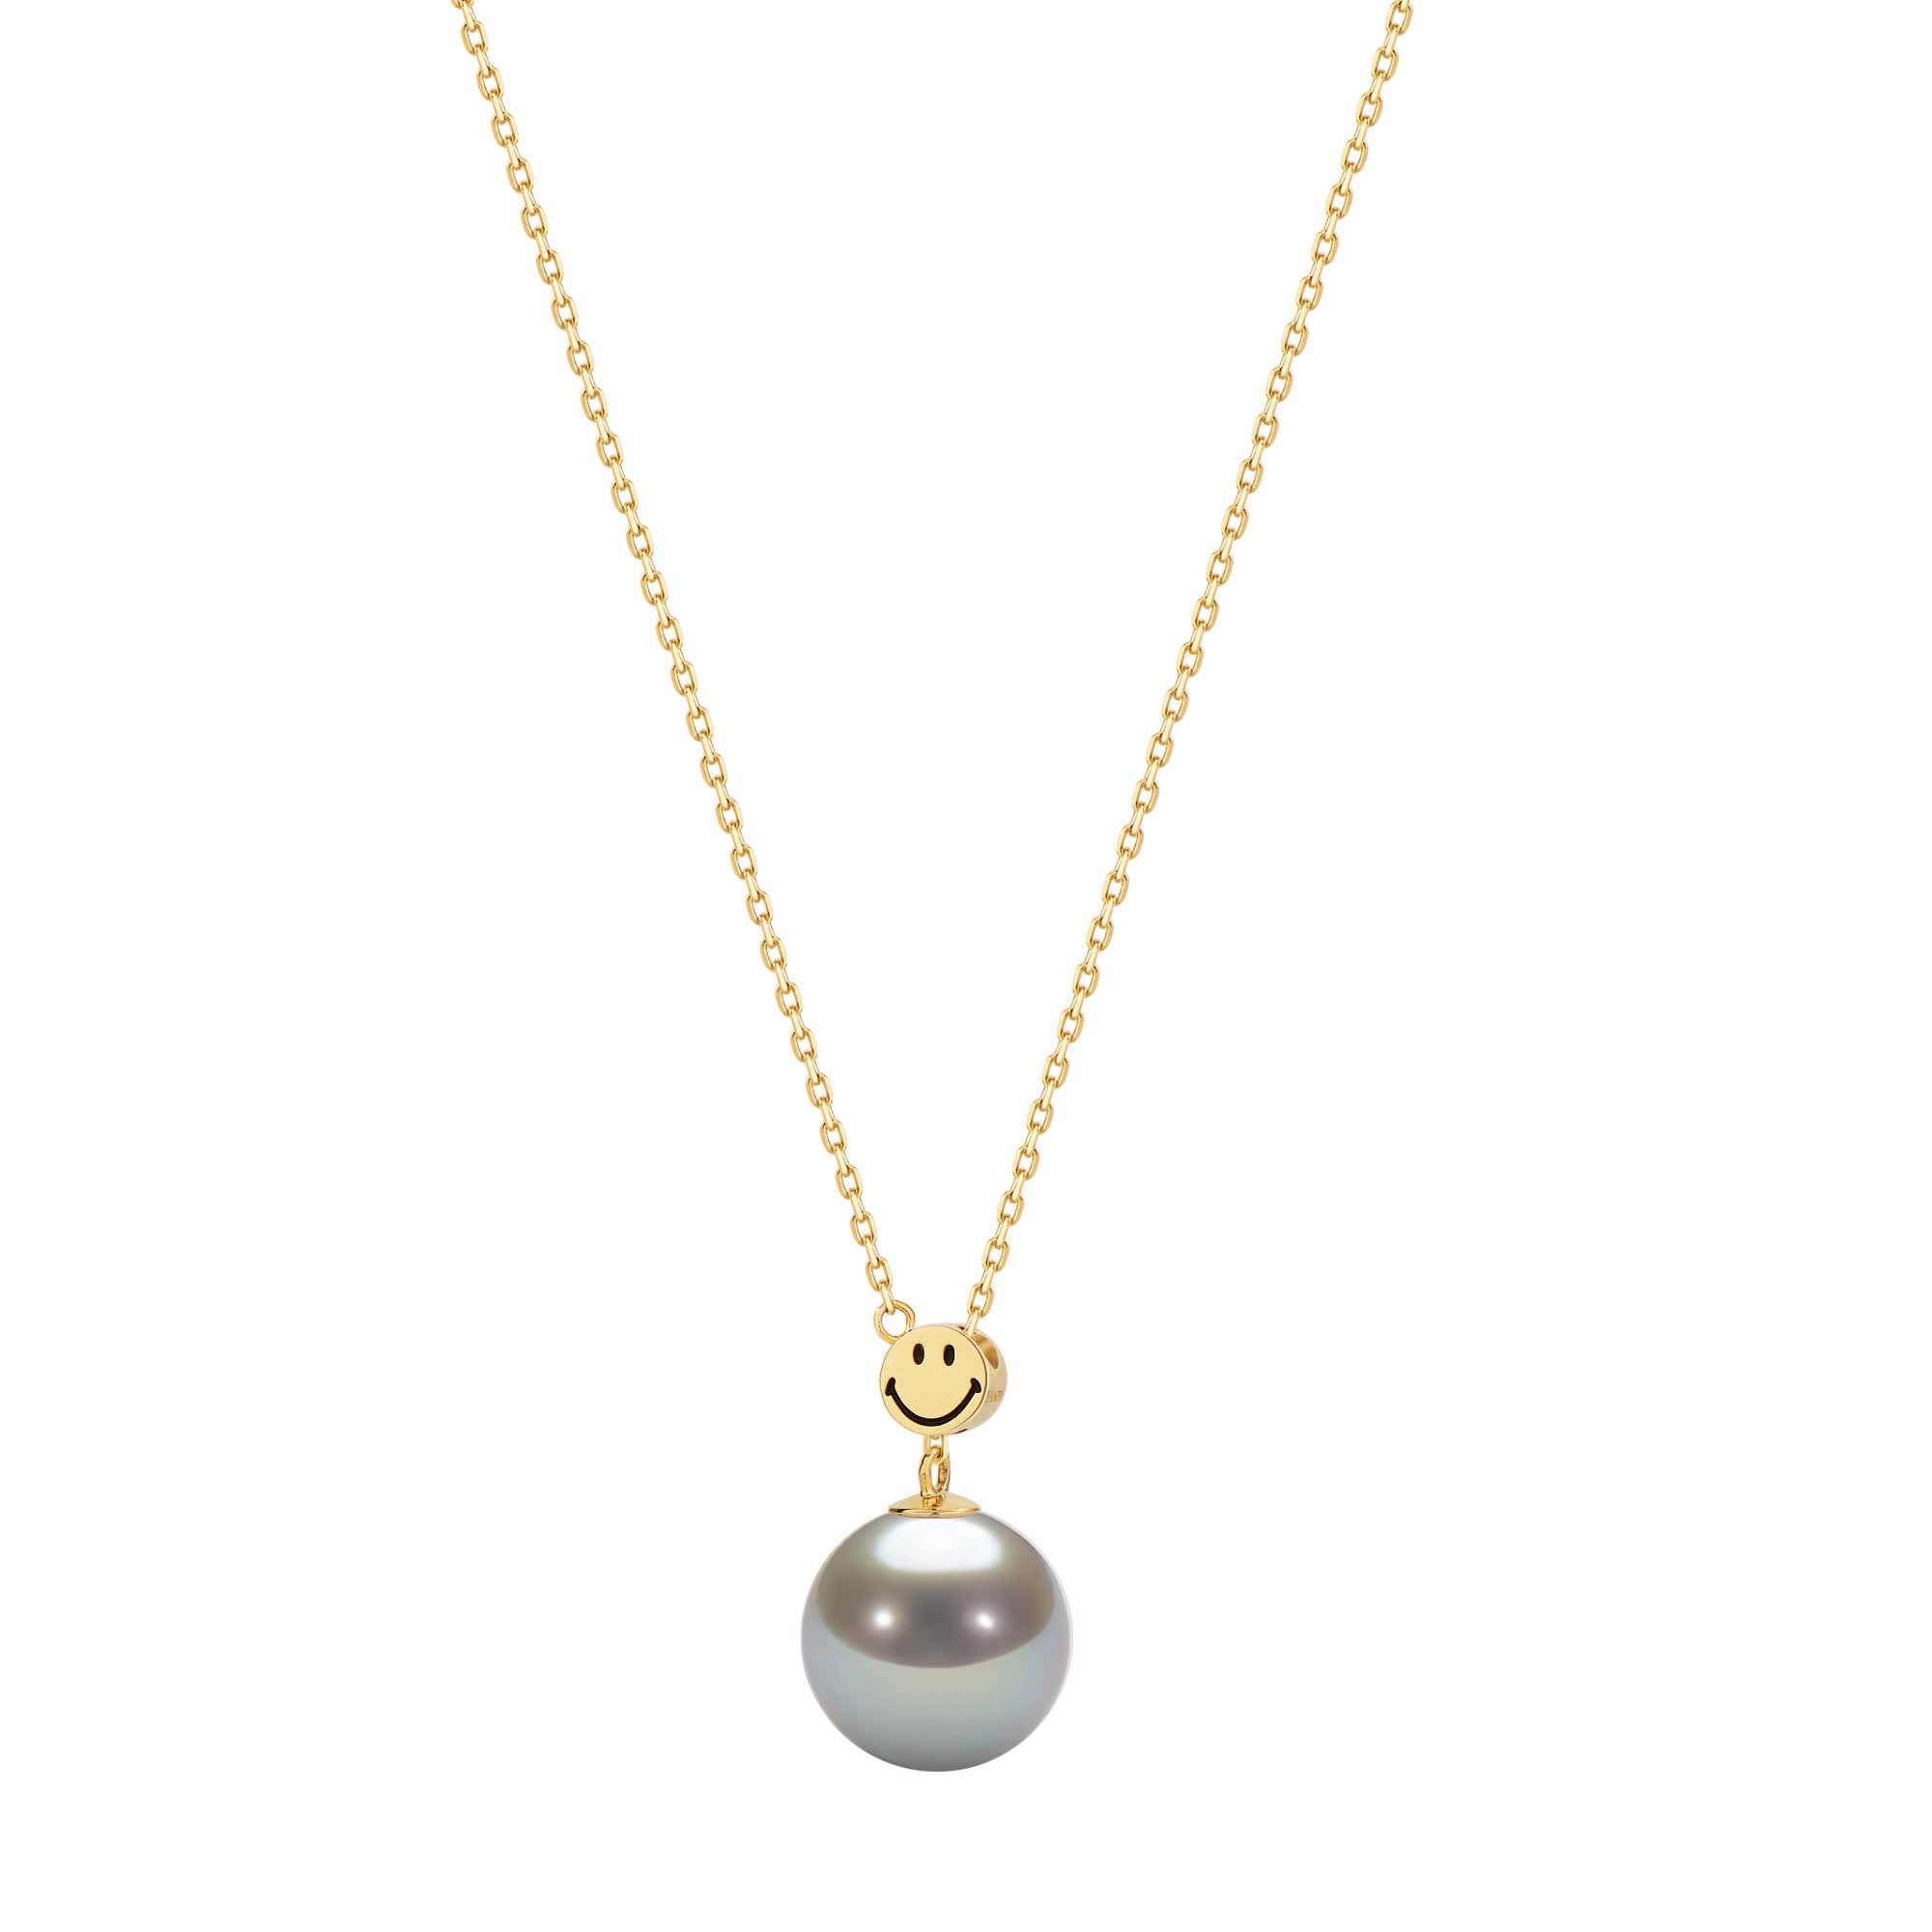 KKLUExSMILEY® 18K Diamond Y Chain with Bead Grey Pearl Necklace 7.5-8mm